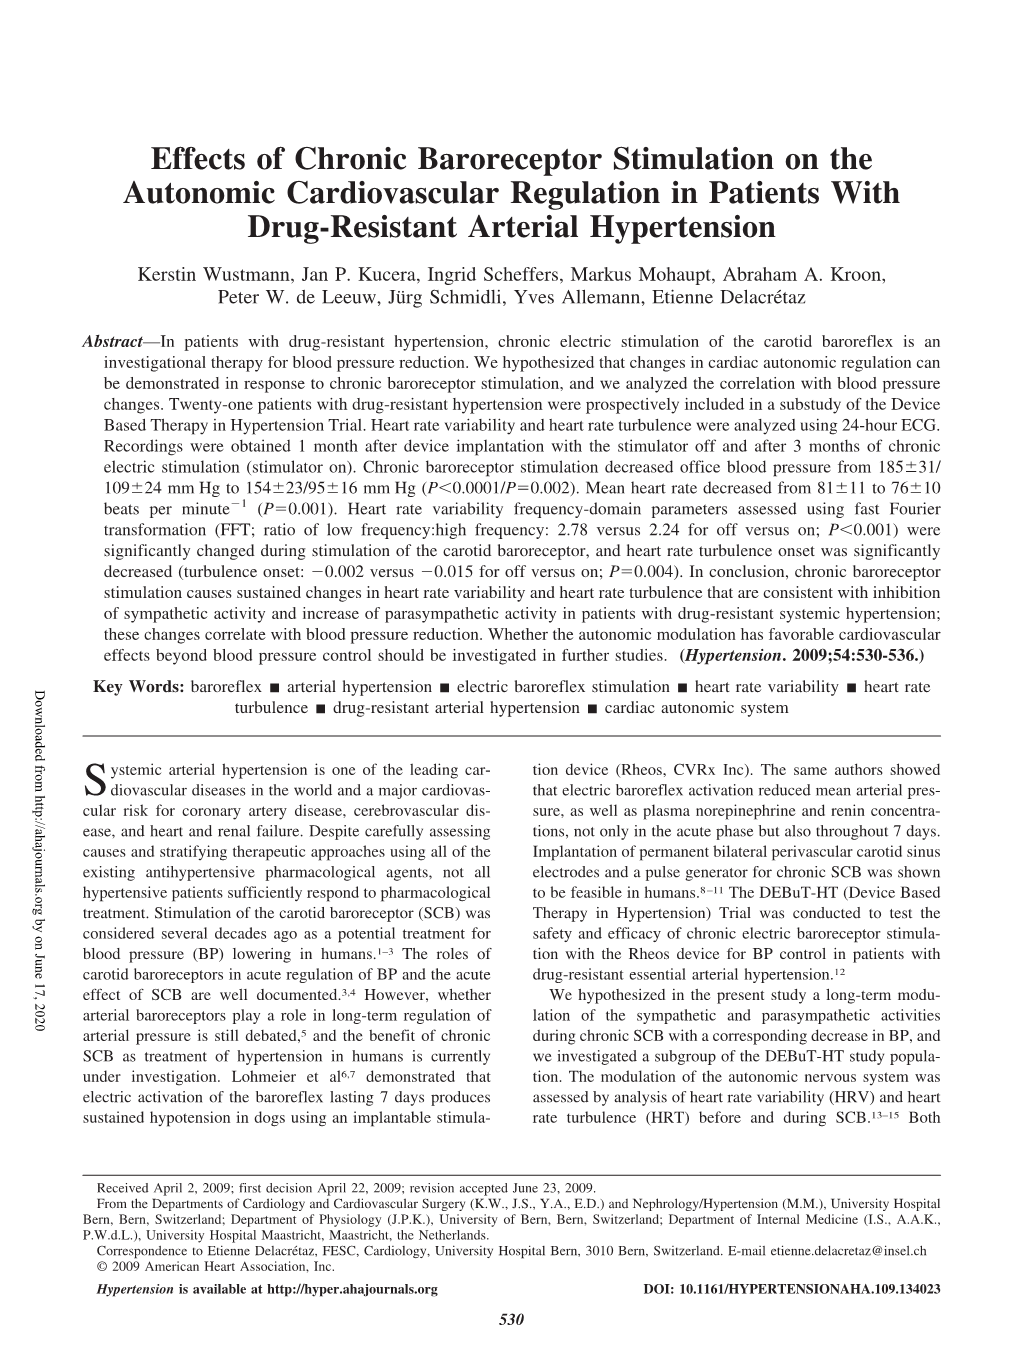 Effects of Chronic Baroreceptor Stimulation on the Autonomic Cardiovascular Regulation in Patients with Drug-Resistant Arterial Hypertension